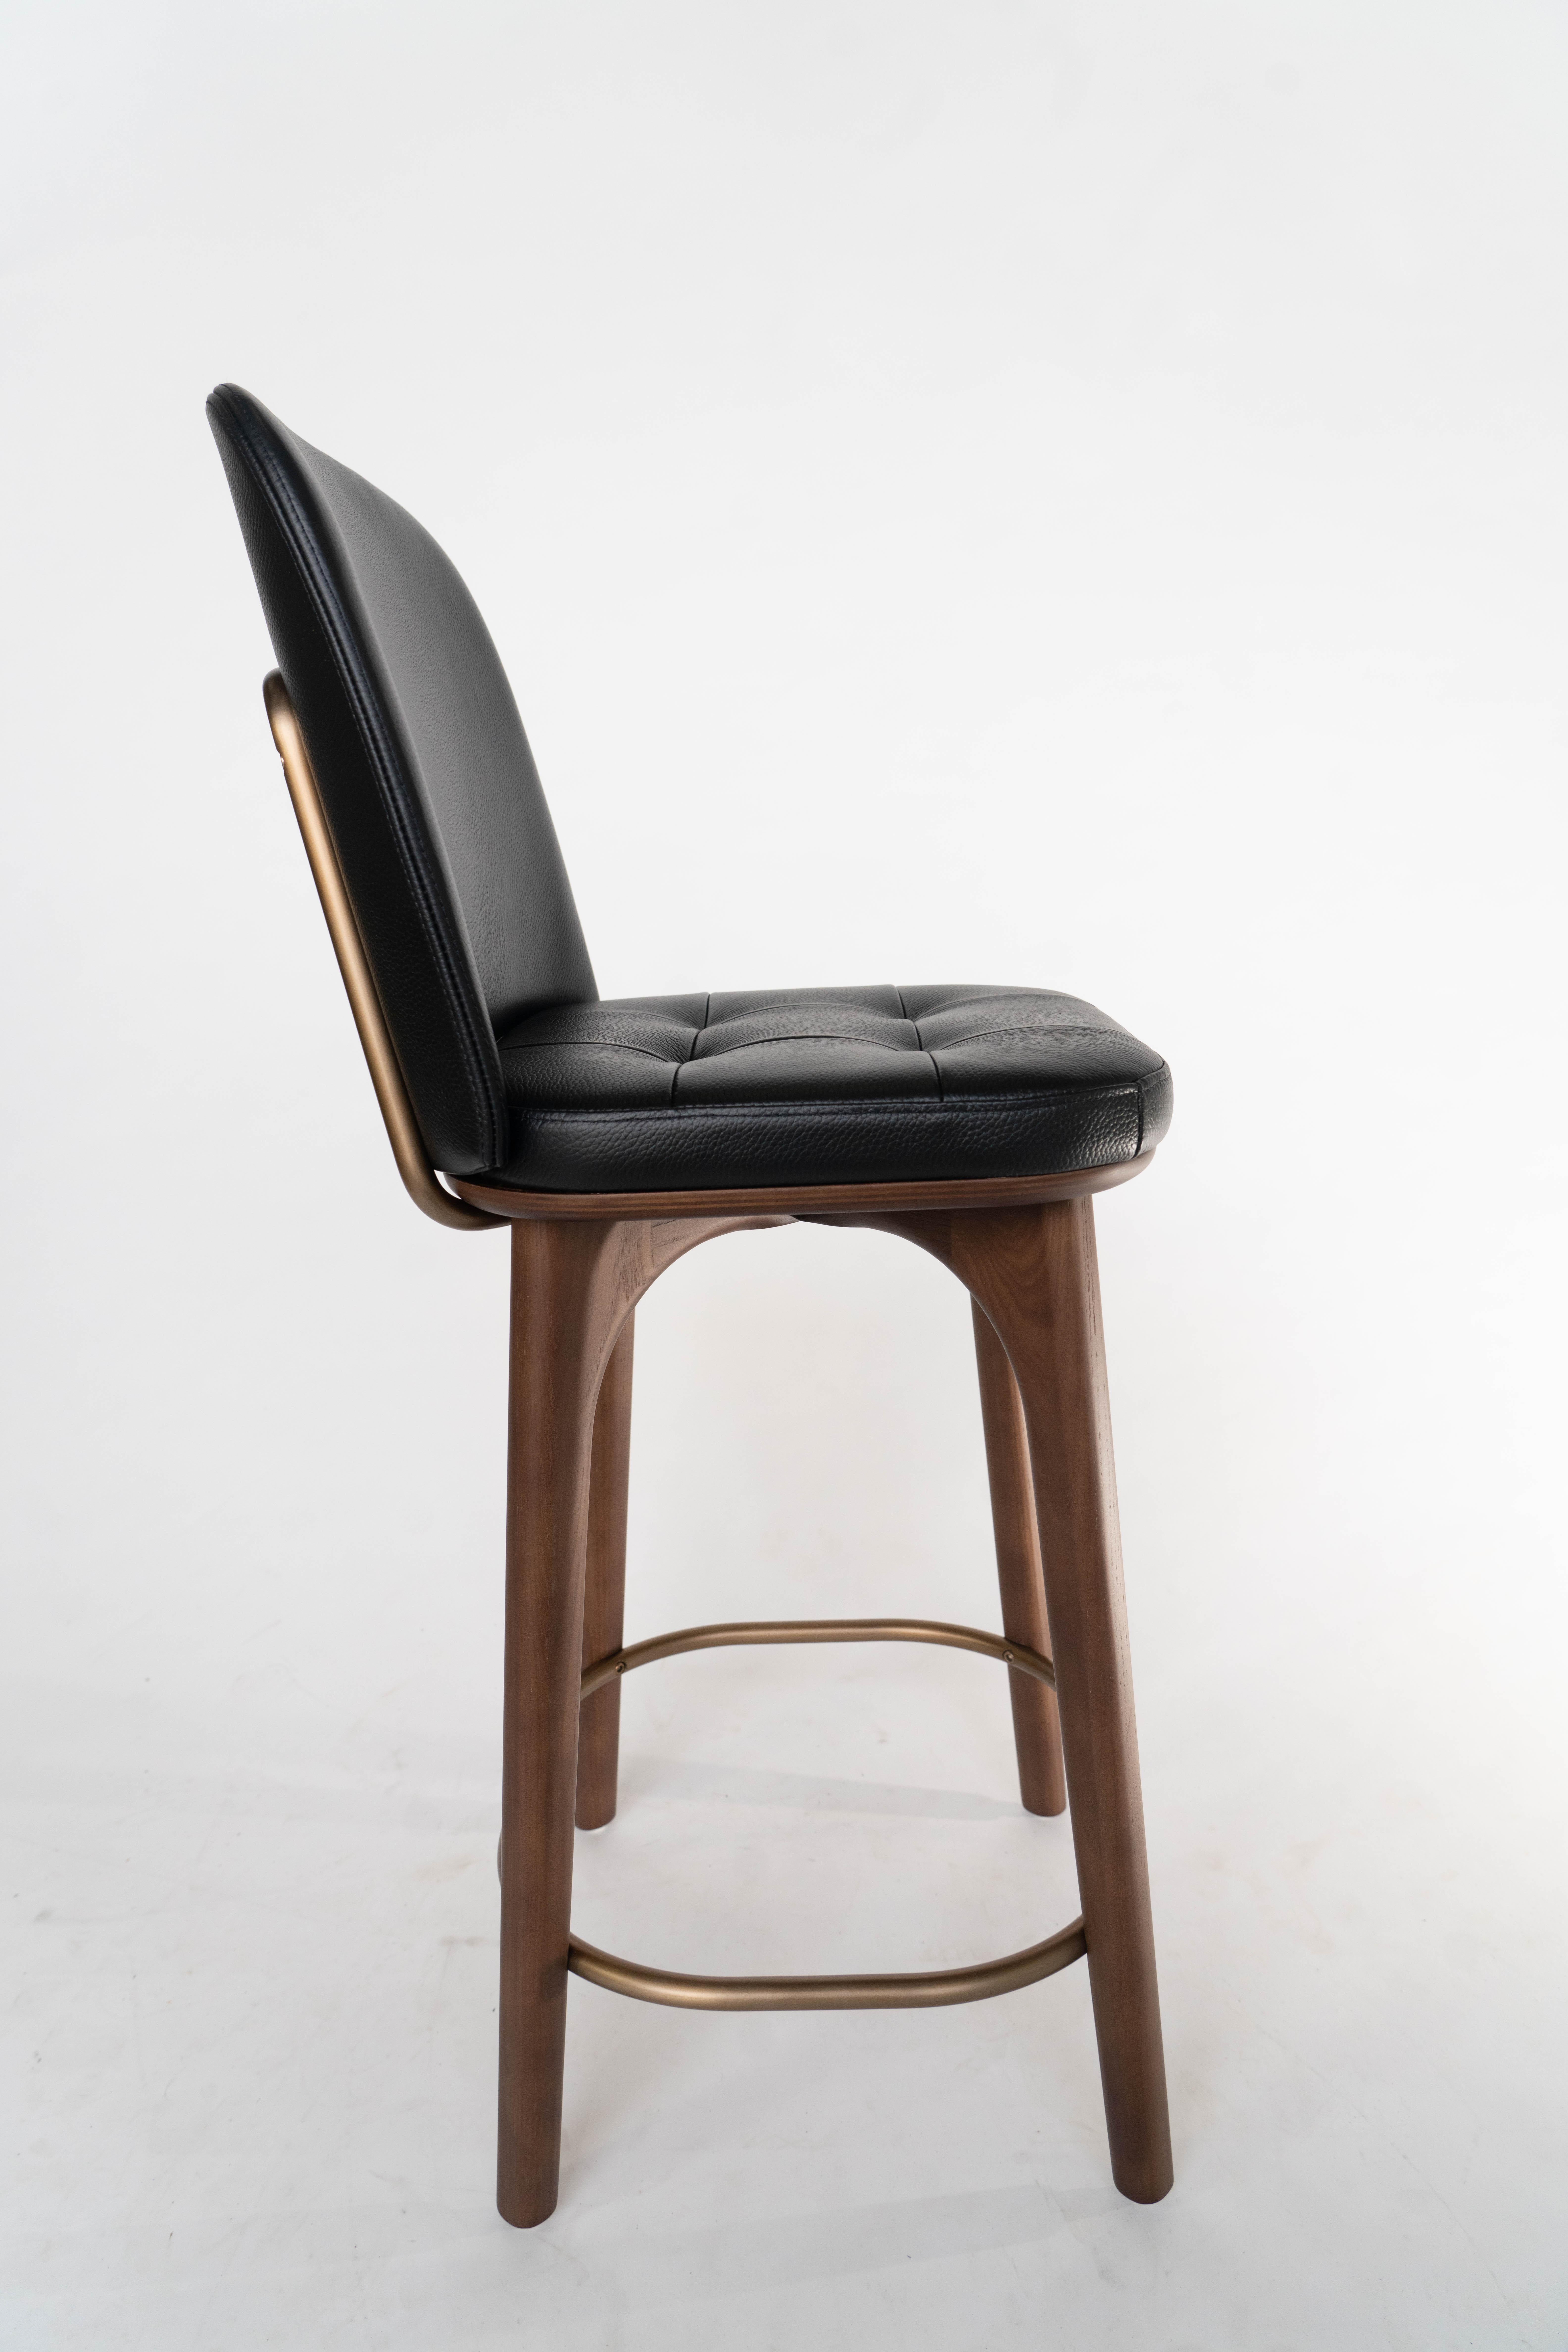 This solid wood and grained leather bar chair is built to last and is often used in hospitality projects but would fit just as well in someones home.  It is in an Ash wood, which happens to no longer be in use for us but is brand new in the